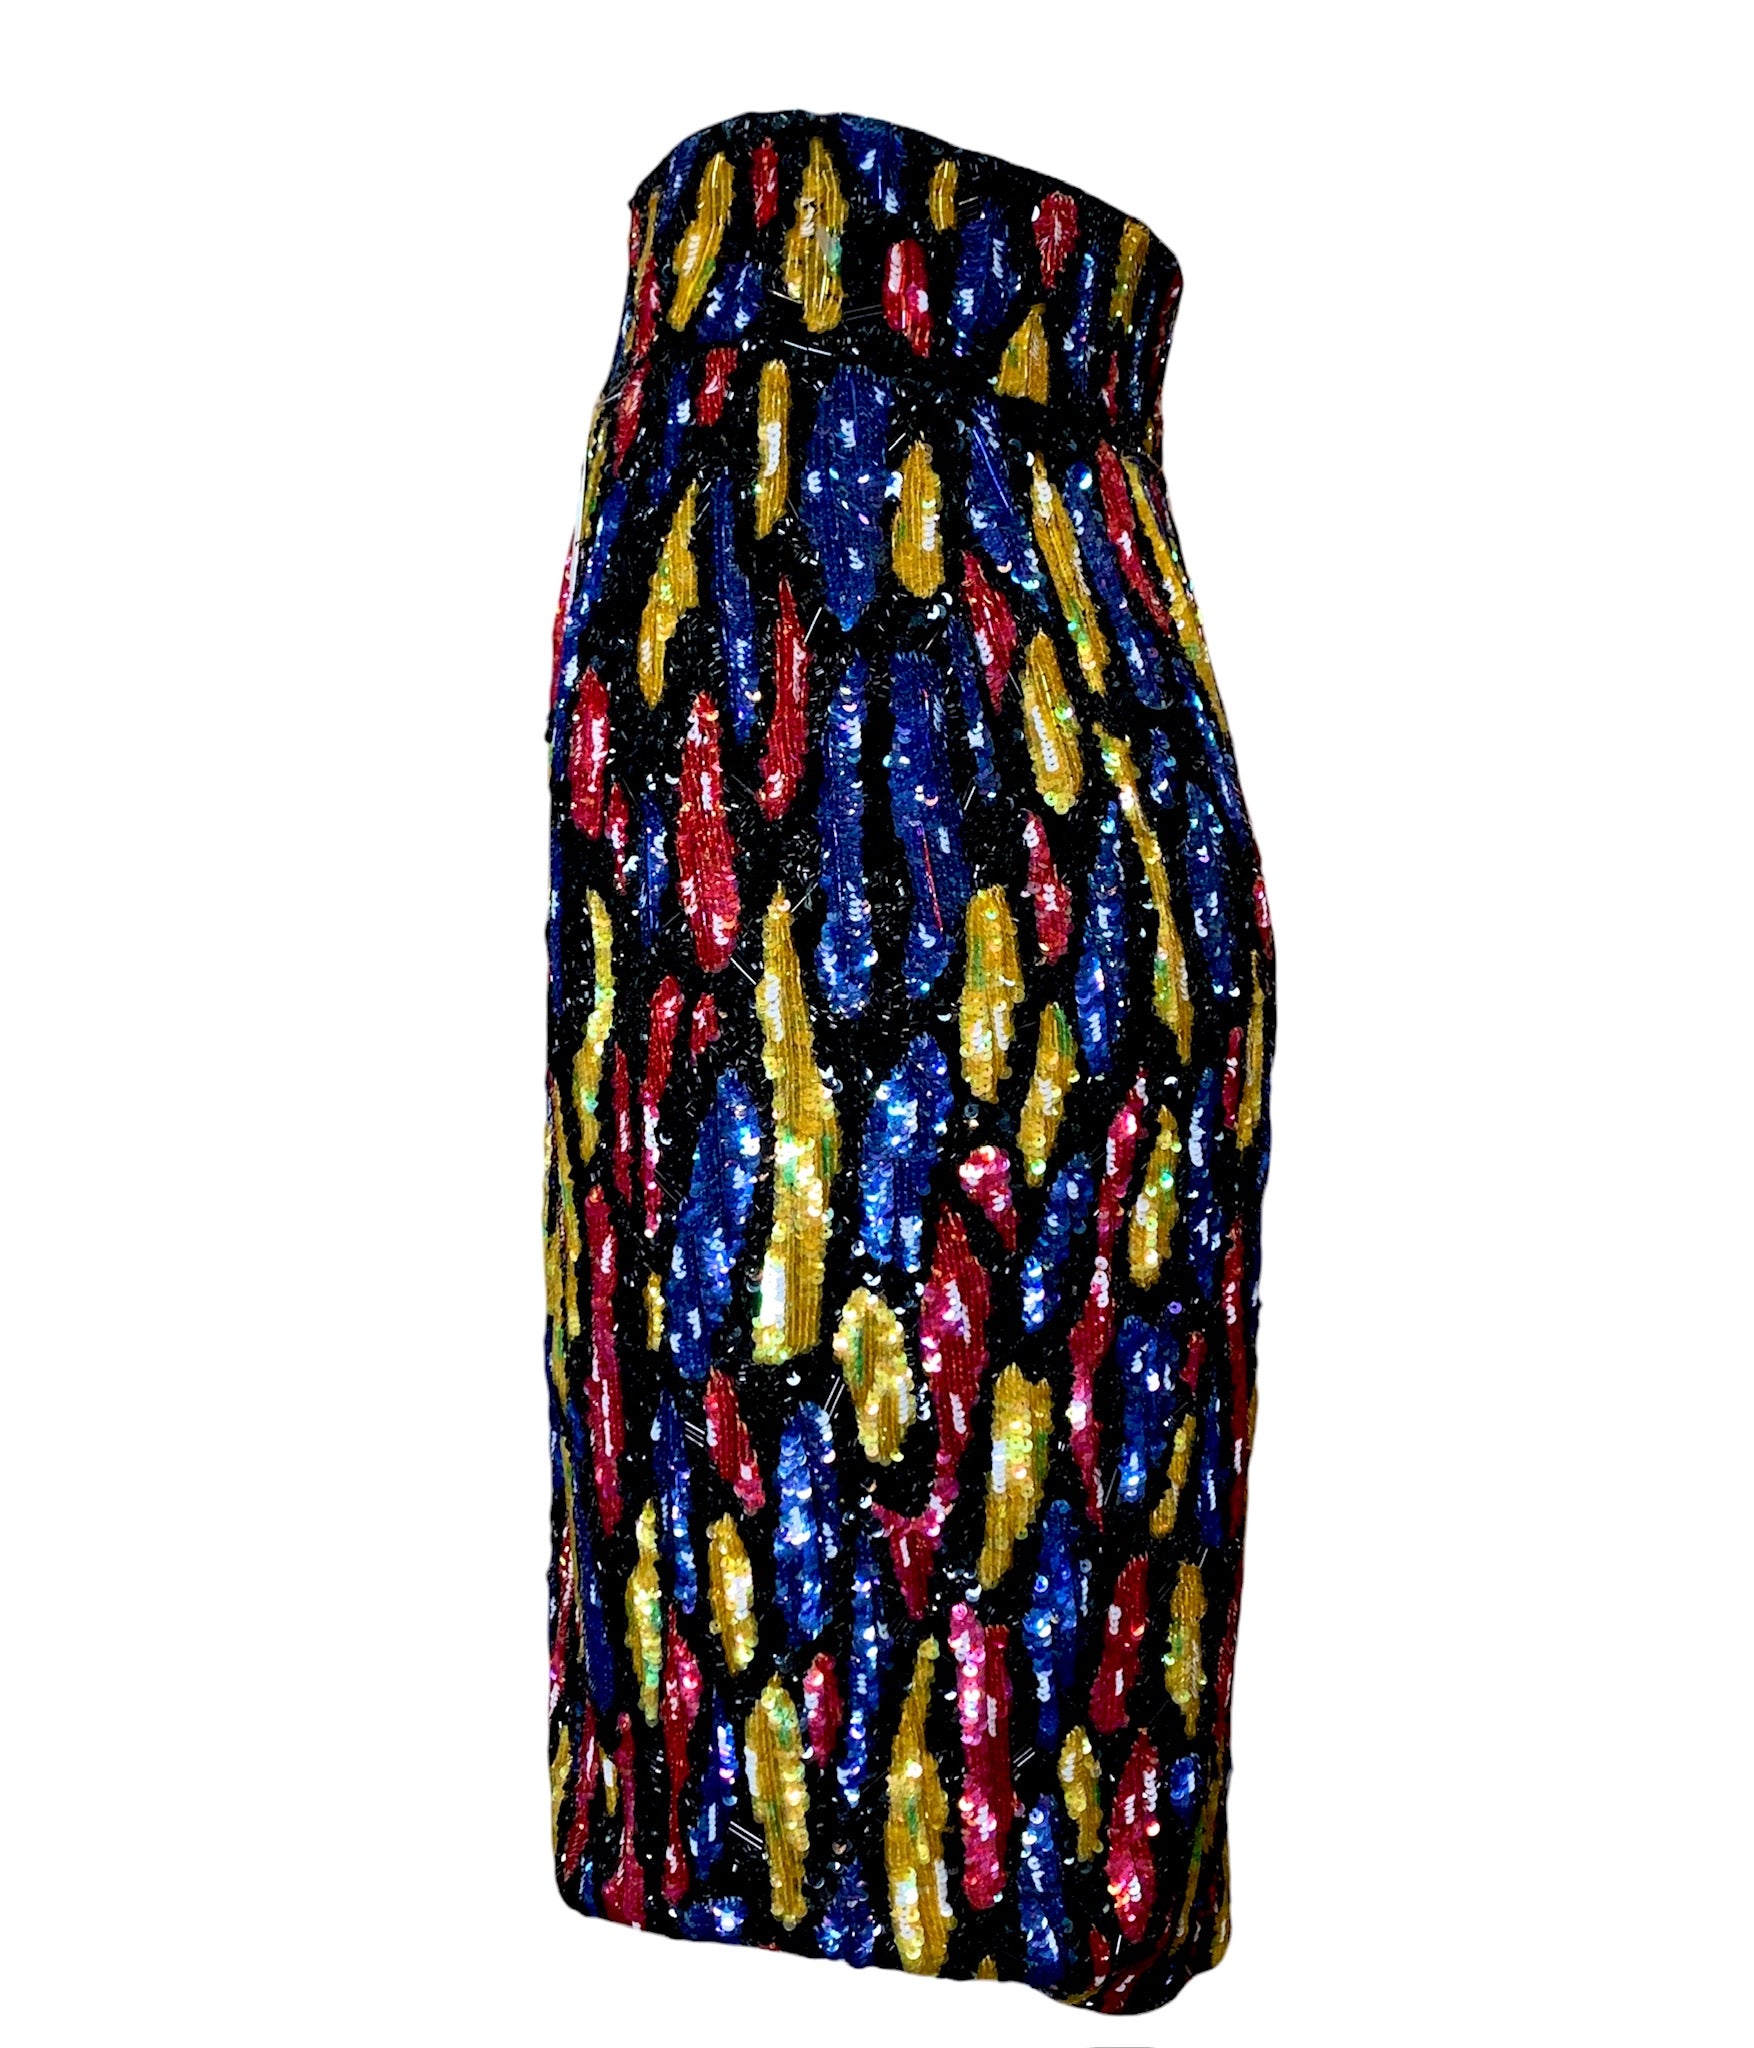 Mila Schon 80s Heavily Beaded and Sequined Cocktail Skirt SIDE 2 of 5